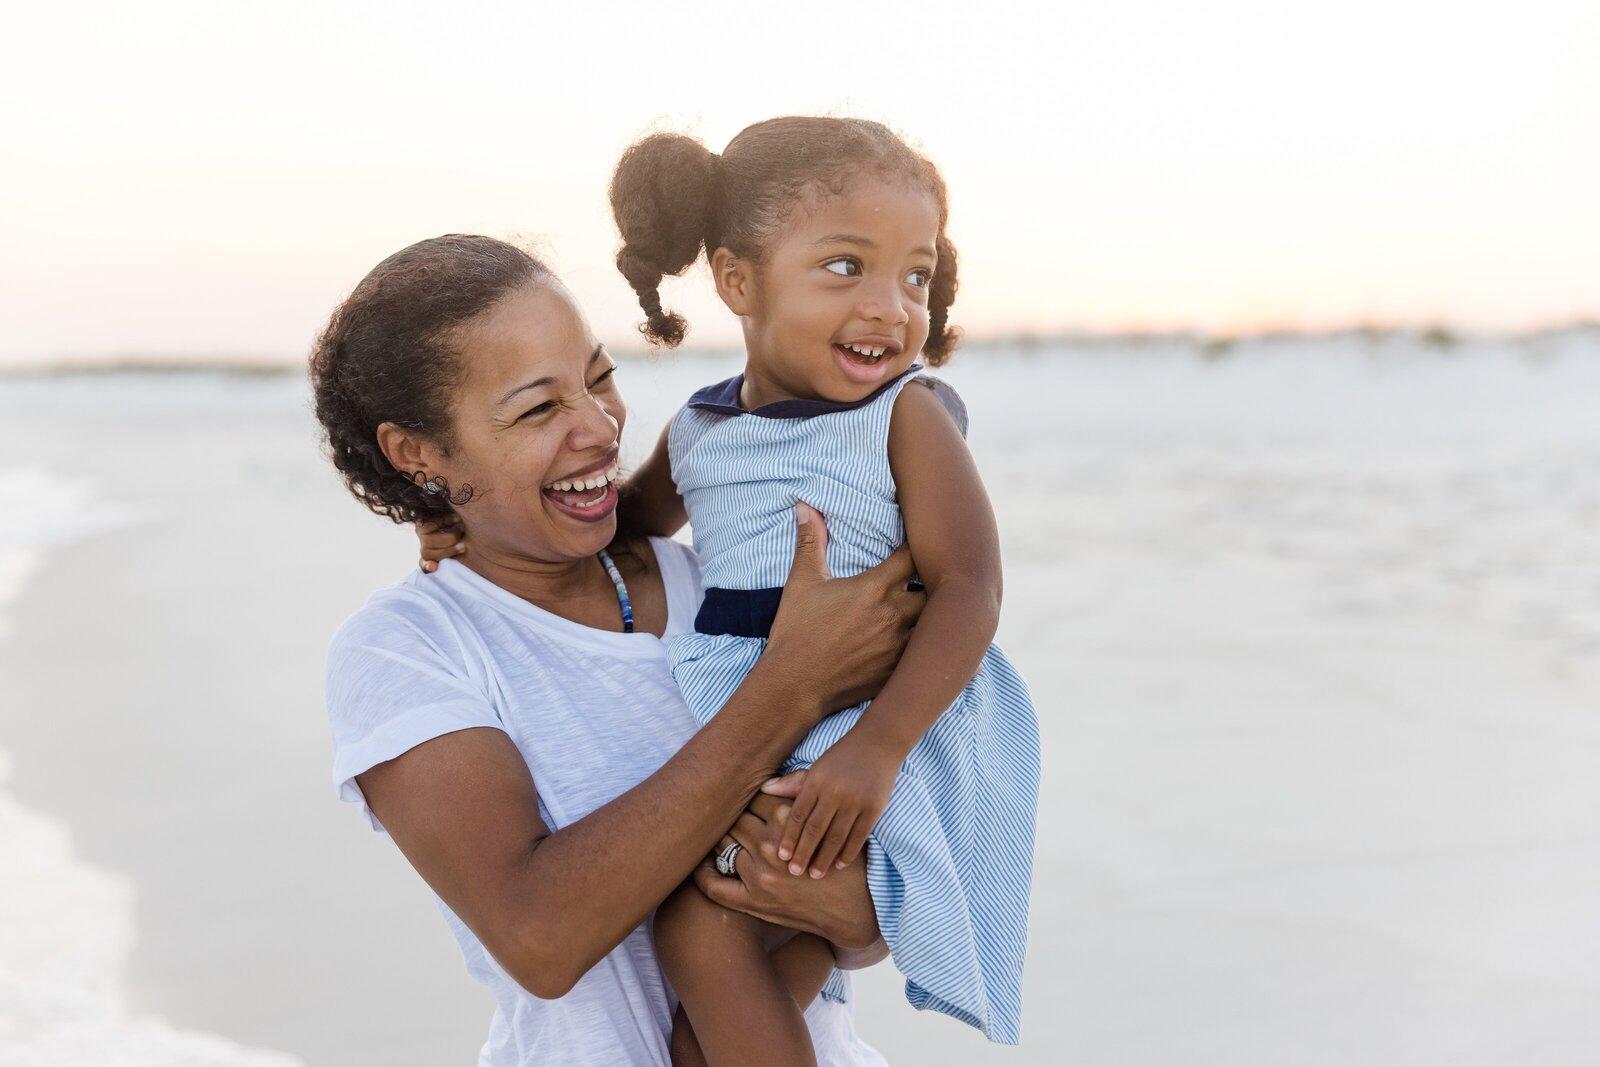 Mother and daughter laughing together during family beach trip photo session